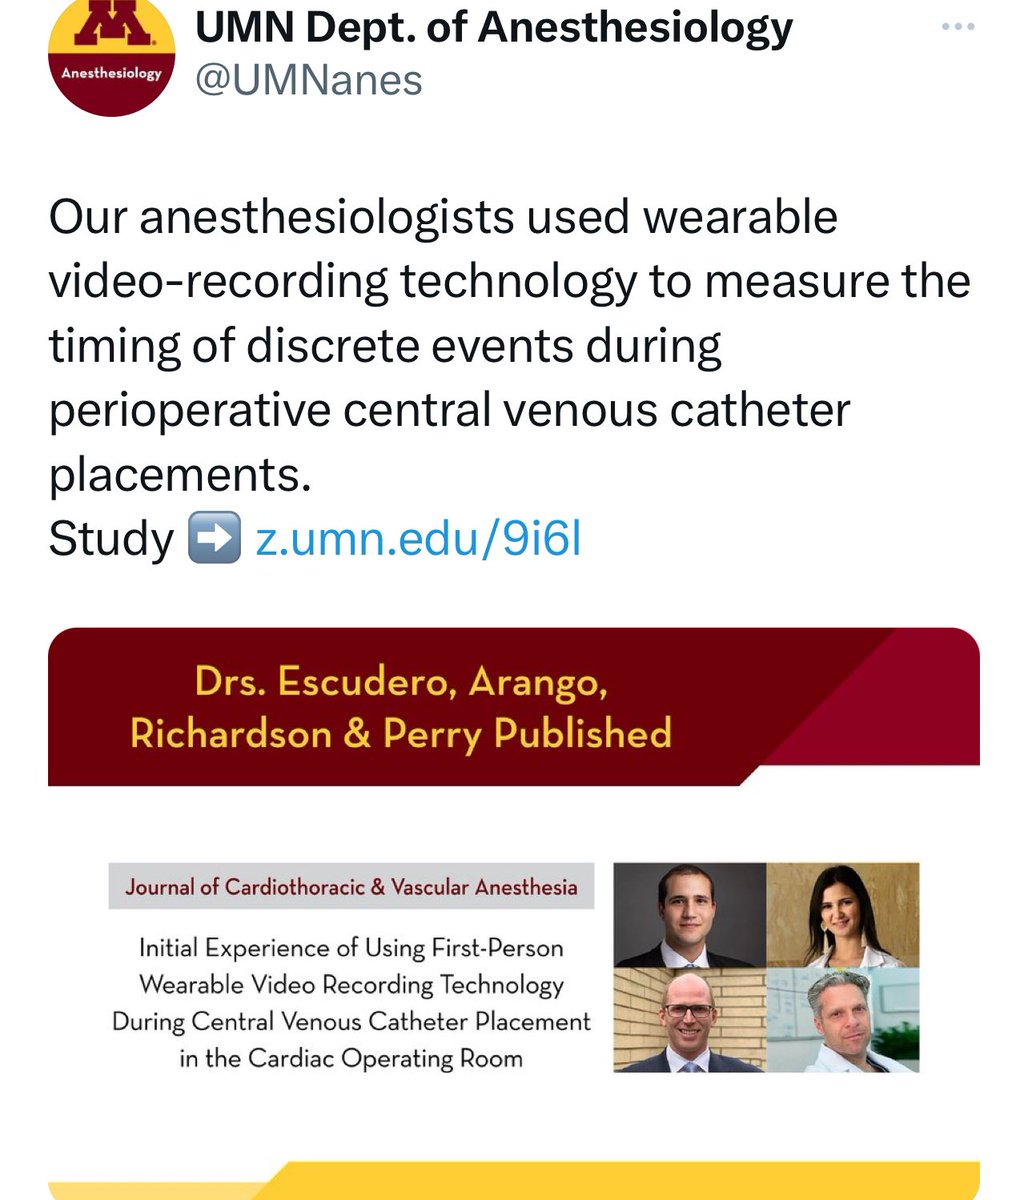 Initial Experience of Using First-Person #Wearable Video Recording Technology During Central Venous Catheter Placement in the Cardiac Operating Room #anesthesia jcvaonline.com